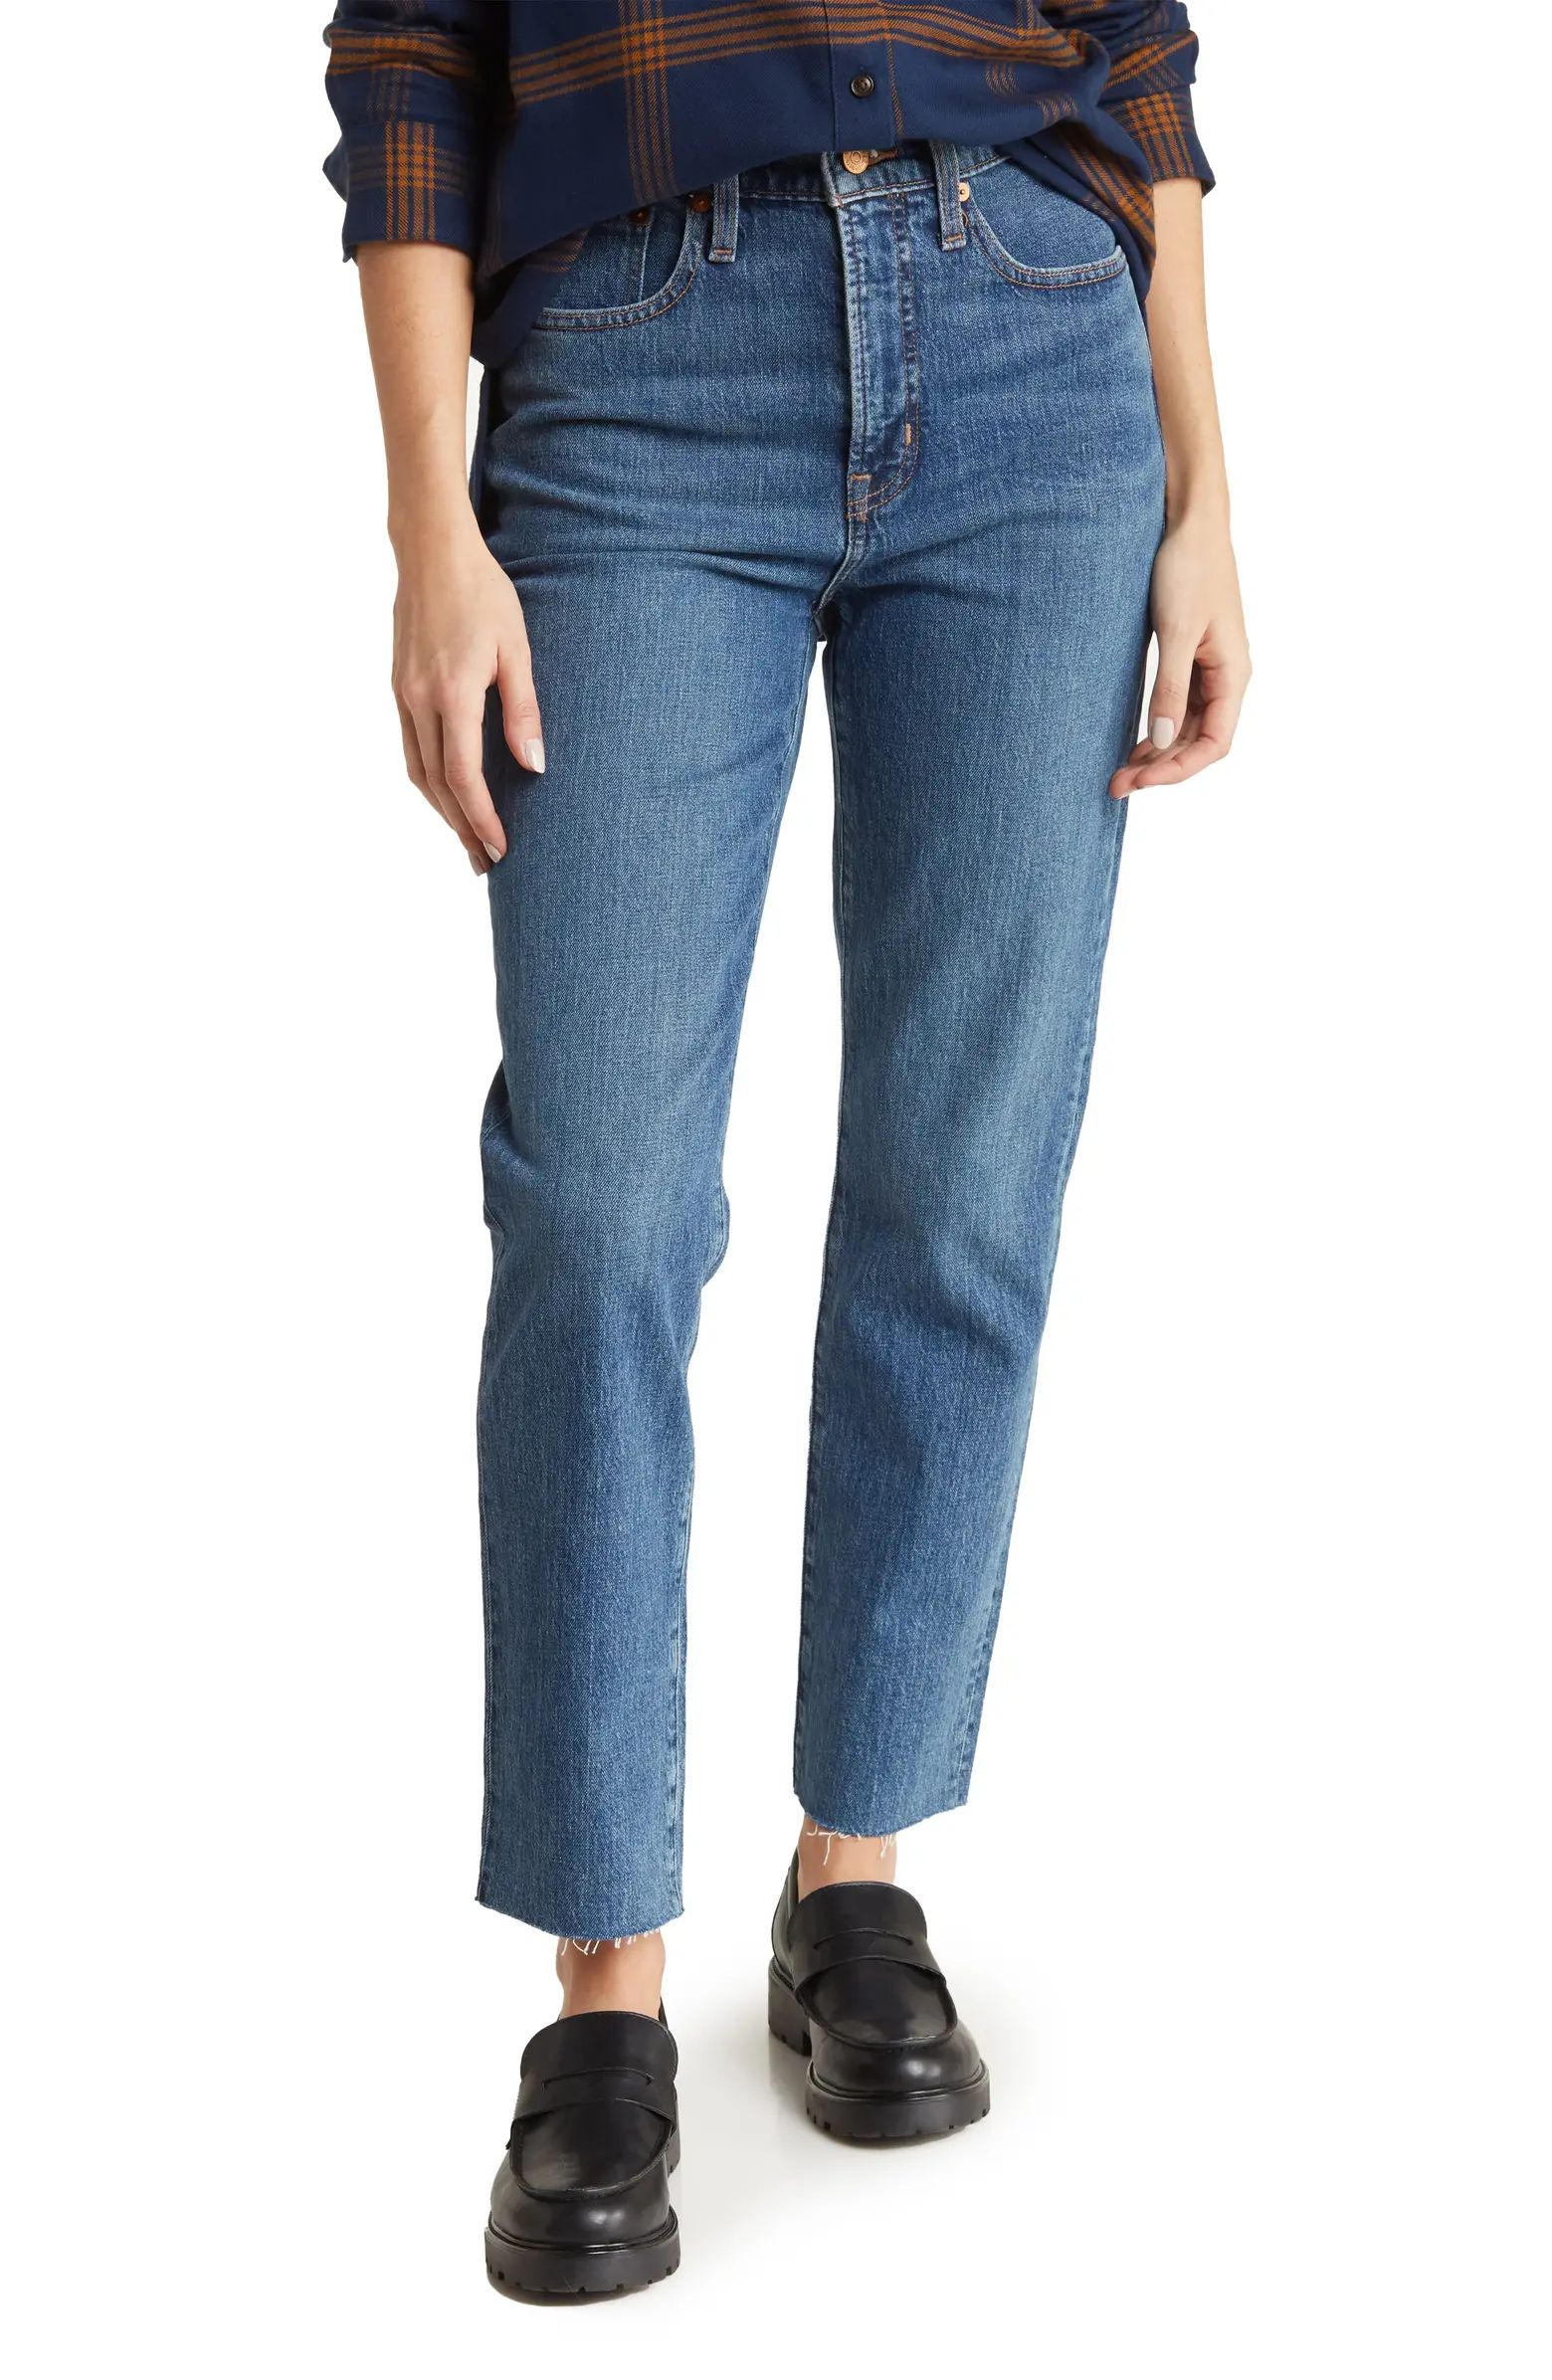 The Perfect Vintage Jeans in Alstyne Wash | Nordstrom Rack